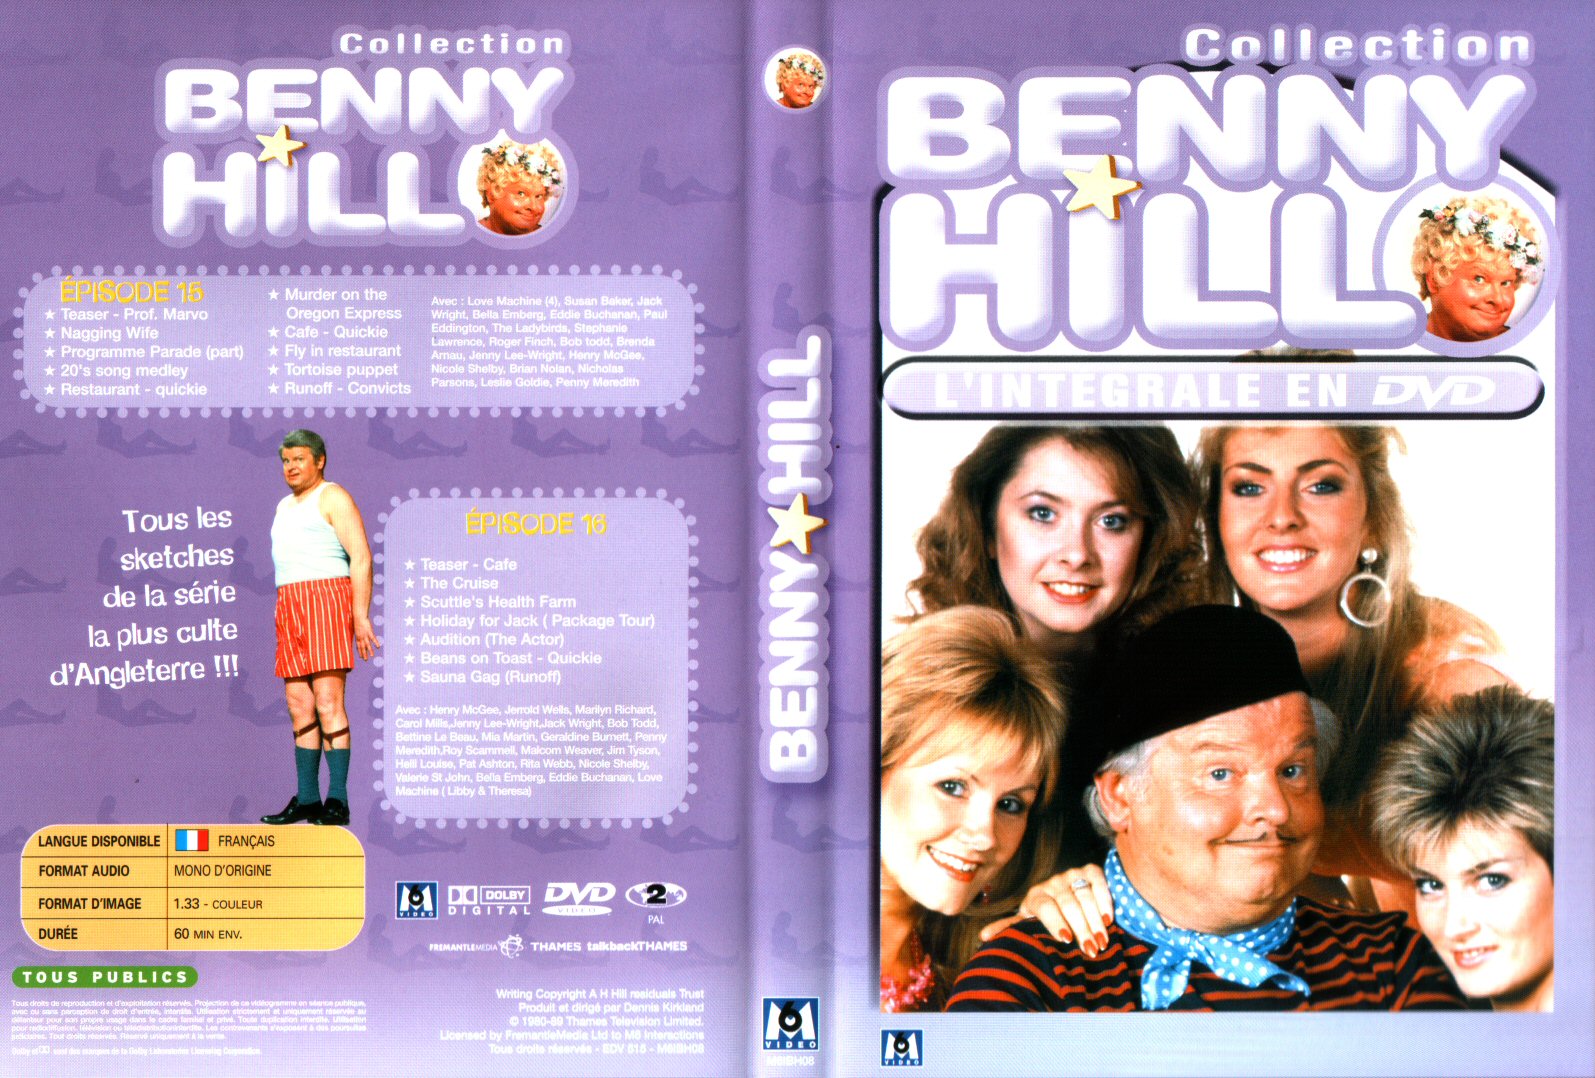 Jaquette DVD Benny Hill collection Episodes 15-16